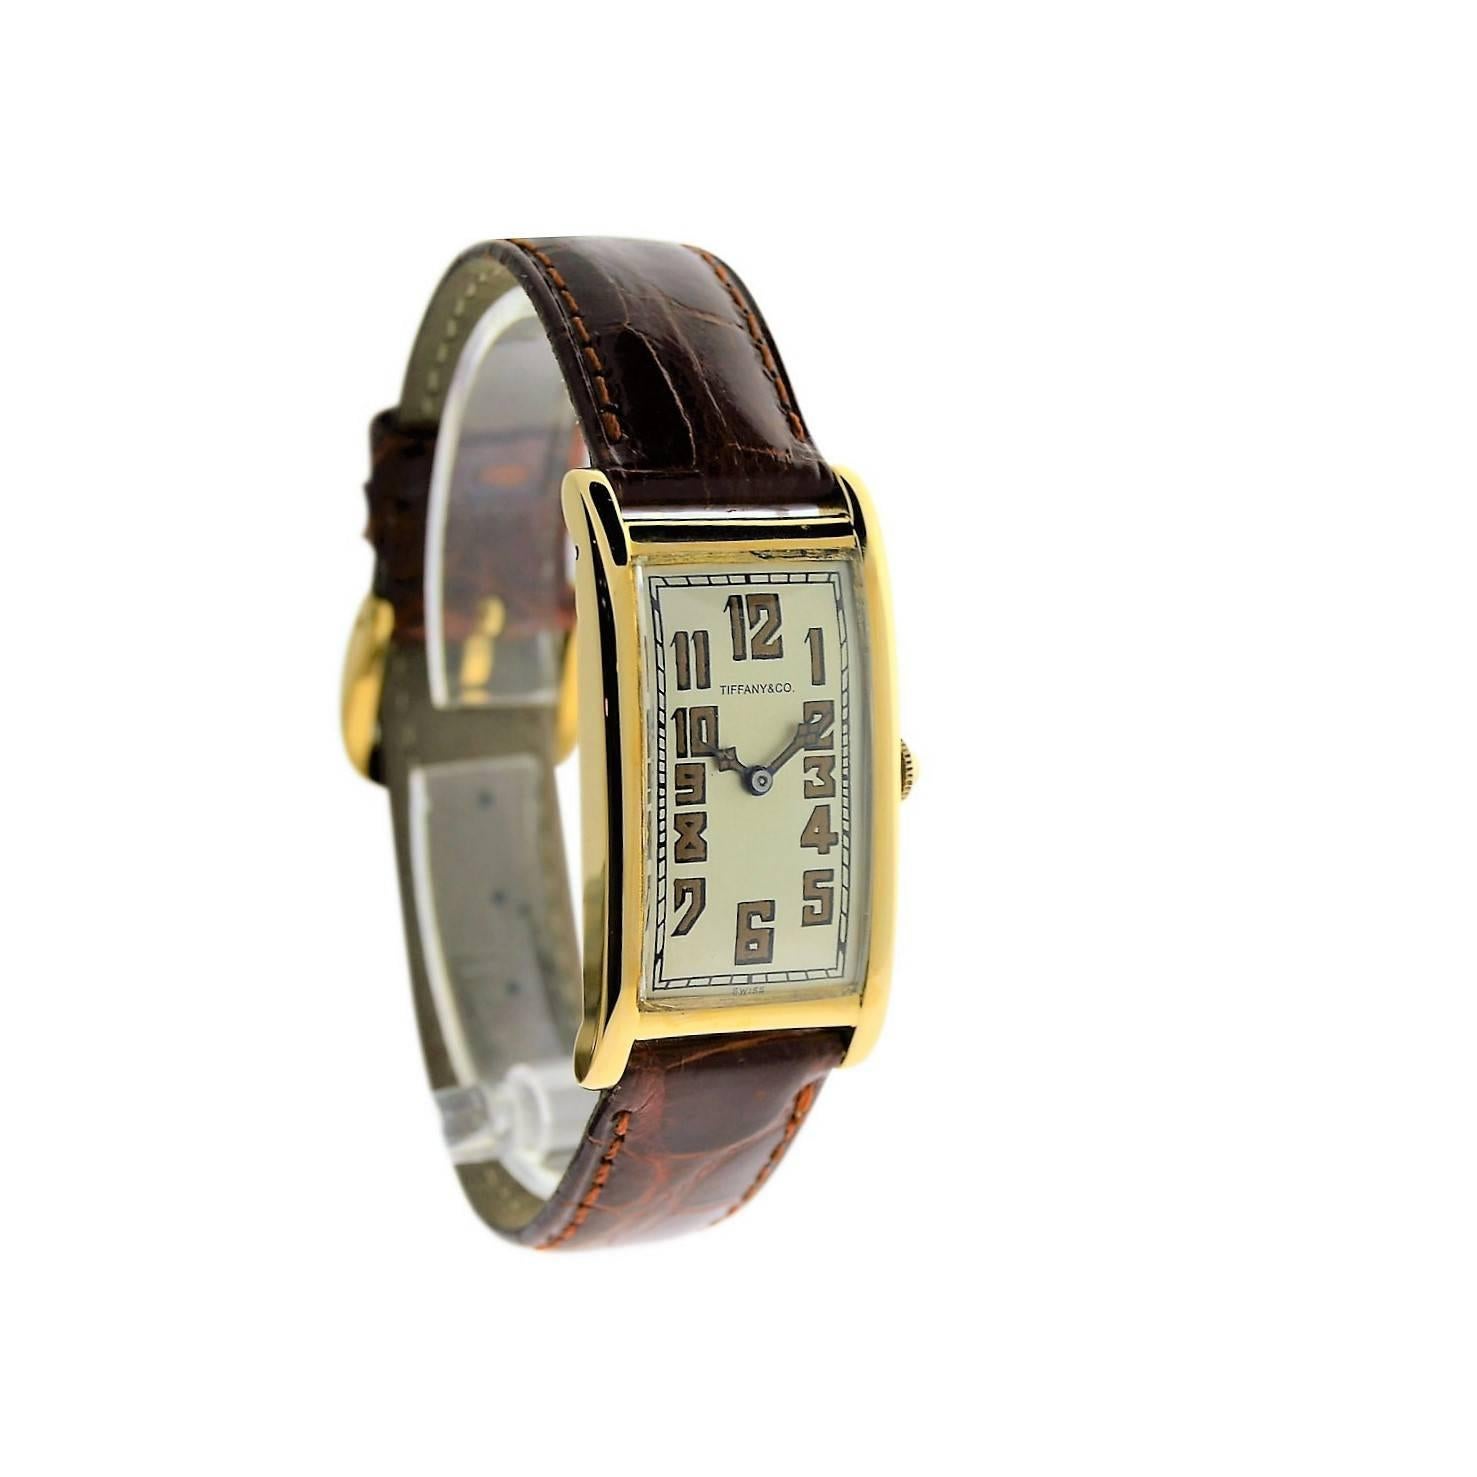 FACTORY / HOUSE: International Watch Company / For Tiffany and Co.  New York
STYLE / REFERENCE: Rectangle /  Art Deco
METAL / MATERIAL: 18Kt. Yellow Gold
CIRCA: 1930's
MOVEMENT / CALIBER: Manual Winding / 17 Jewels / HIgh Grade Hand Finished
DIAL /